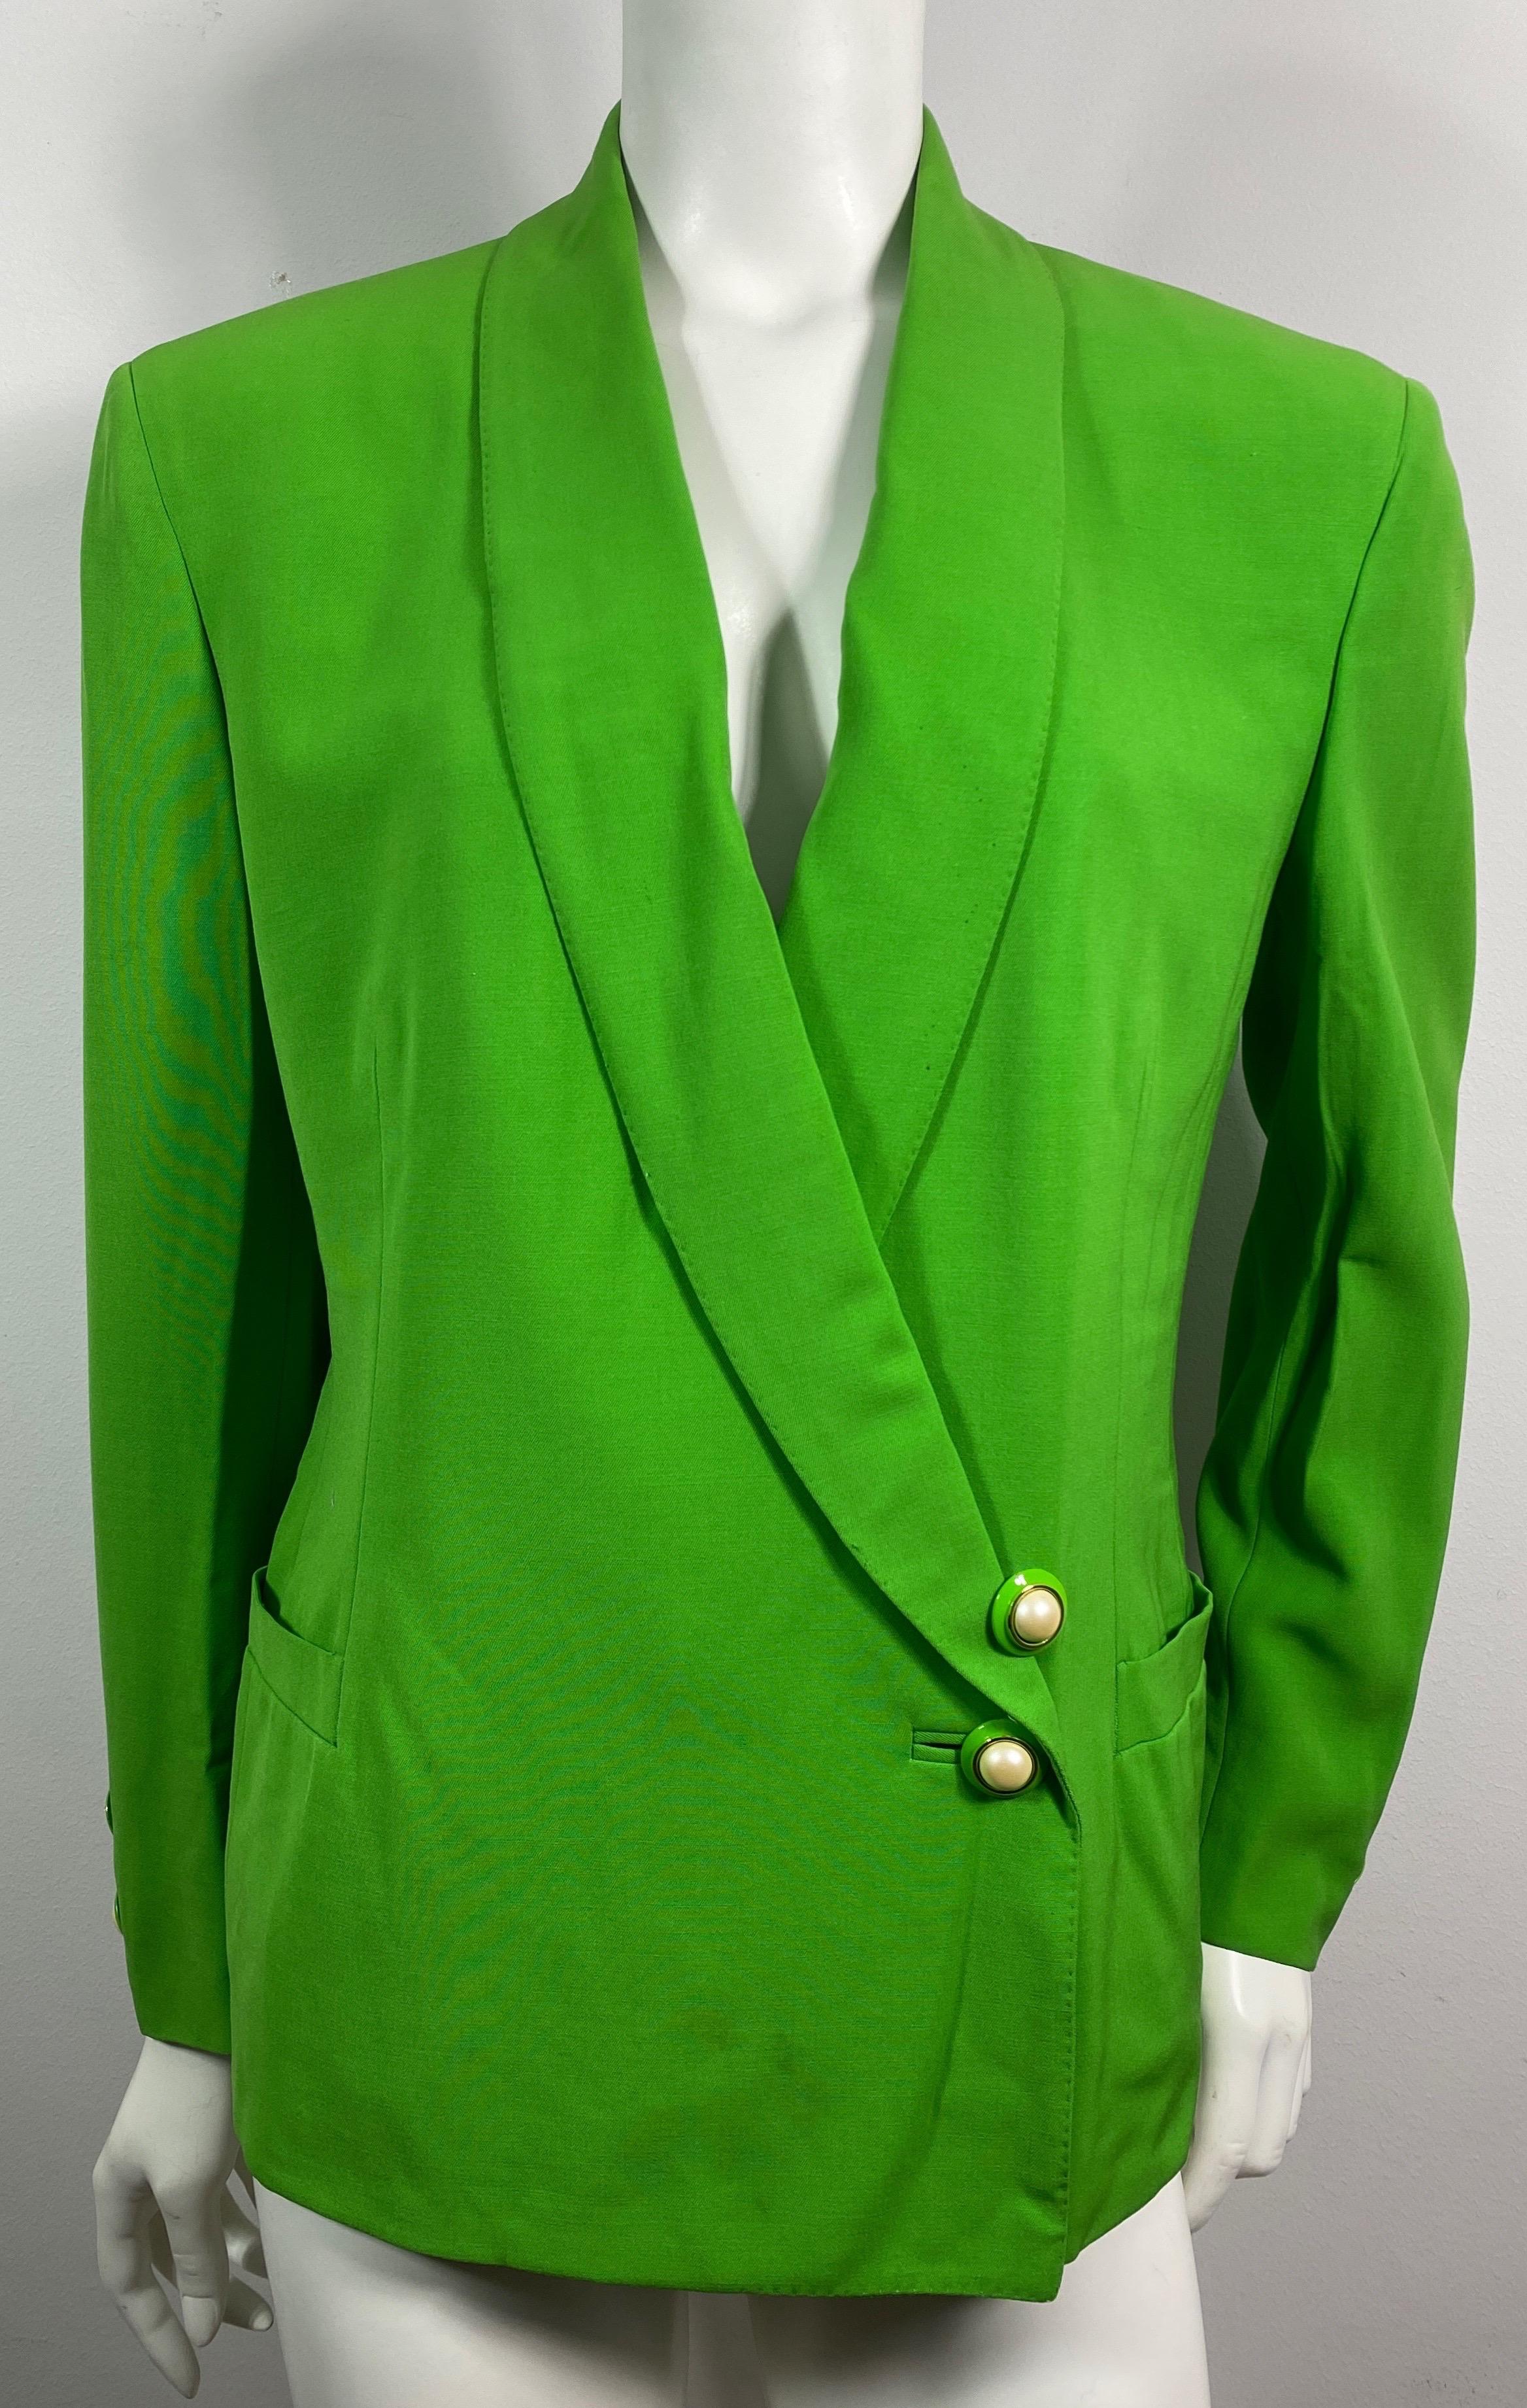 Gianni Versace Couture 1990’s Neón Green Double Breasted Jacket-Size 42. This collectible piece of Versace 90’s history is made of a neon green silk wool blend, large shoulder pads, Double breasted although the only buttons you see are two large